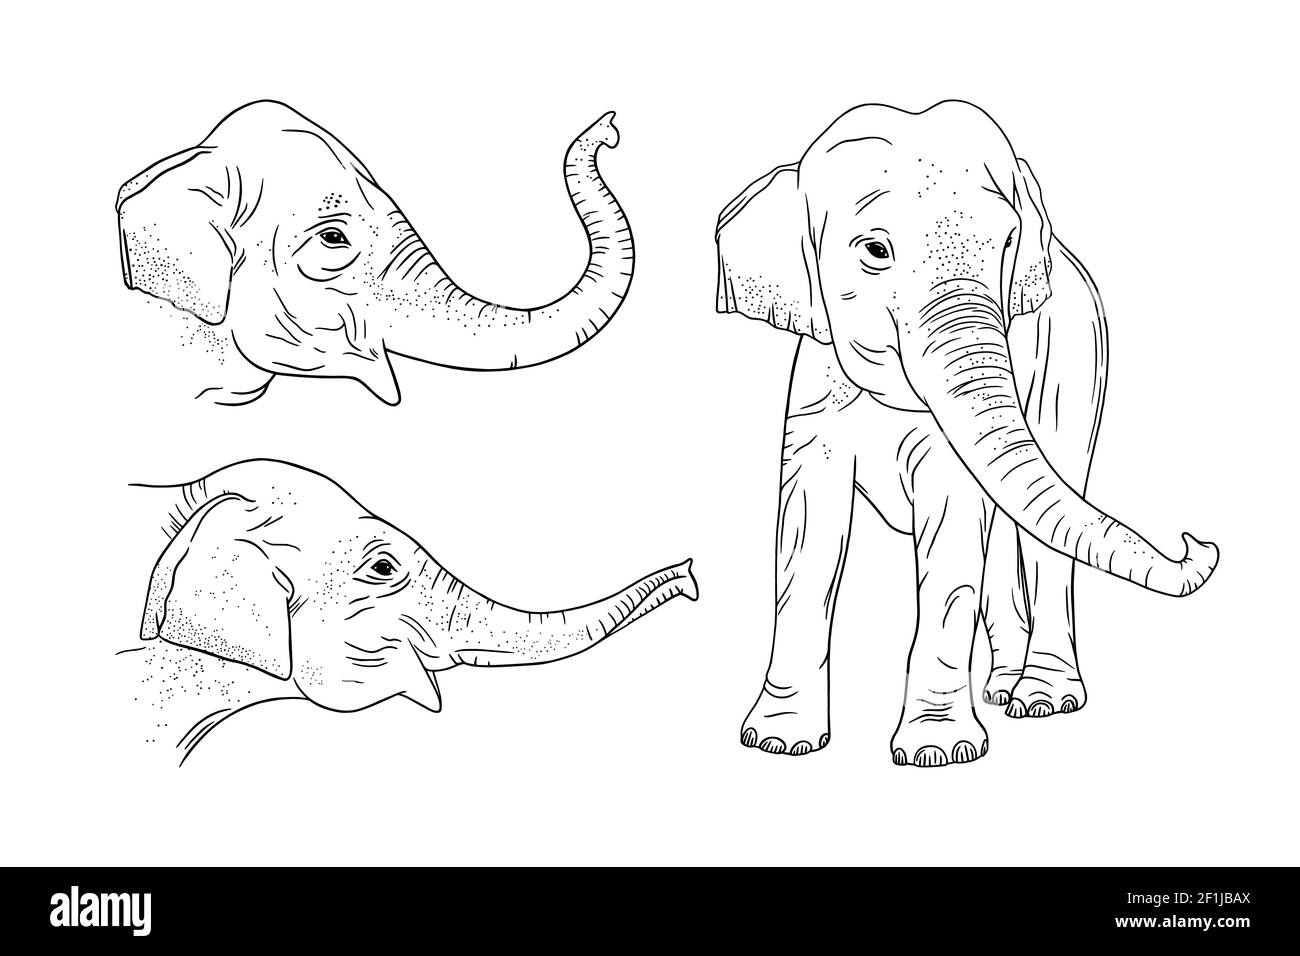 Realistic elephant set isolated on white background. Engraved Indian elephant for zoo designs. Sketch vector illustration Stock Vector